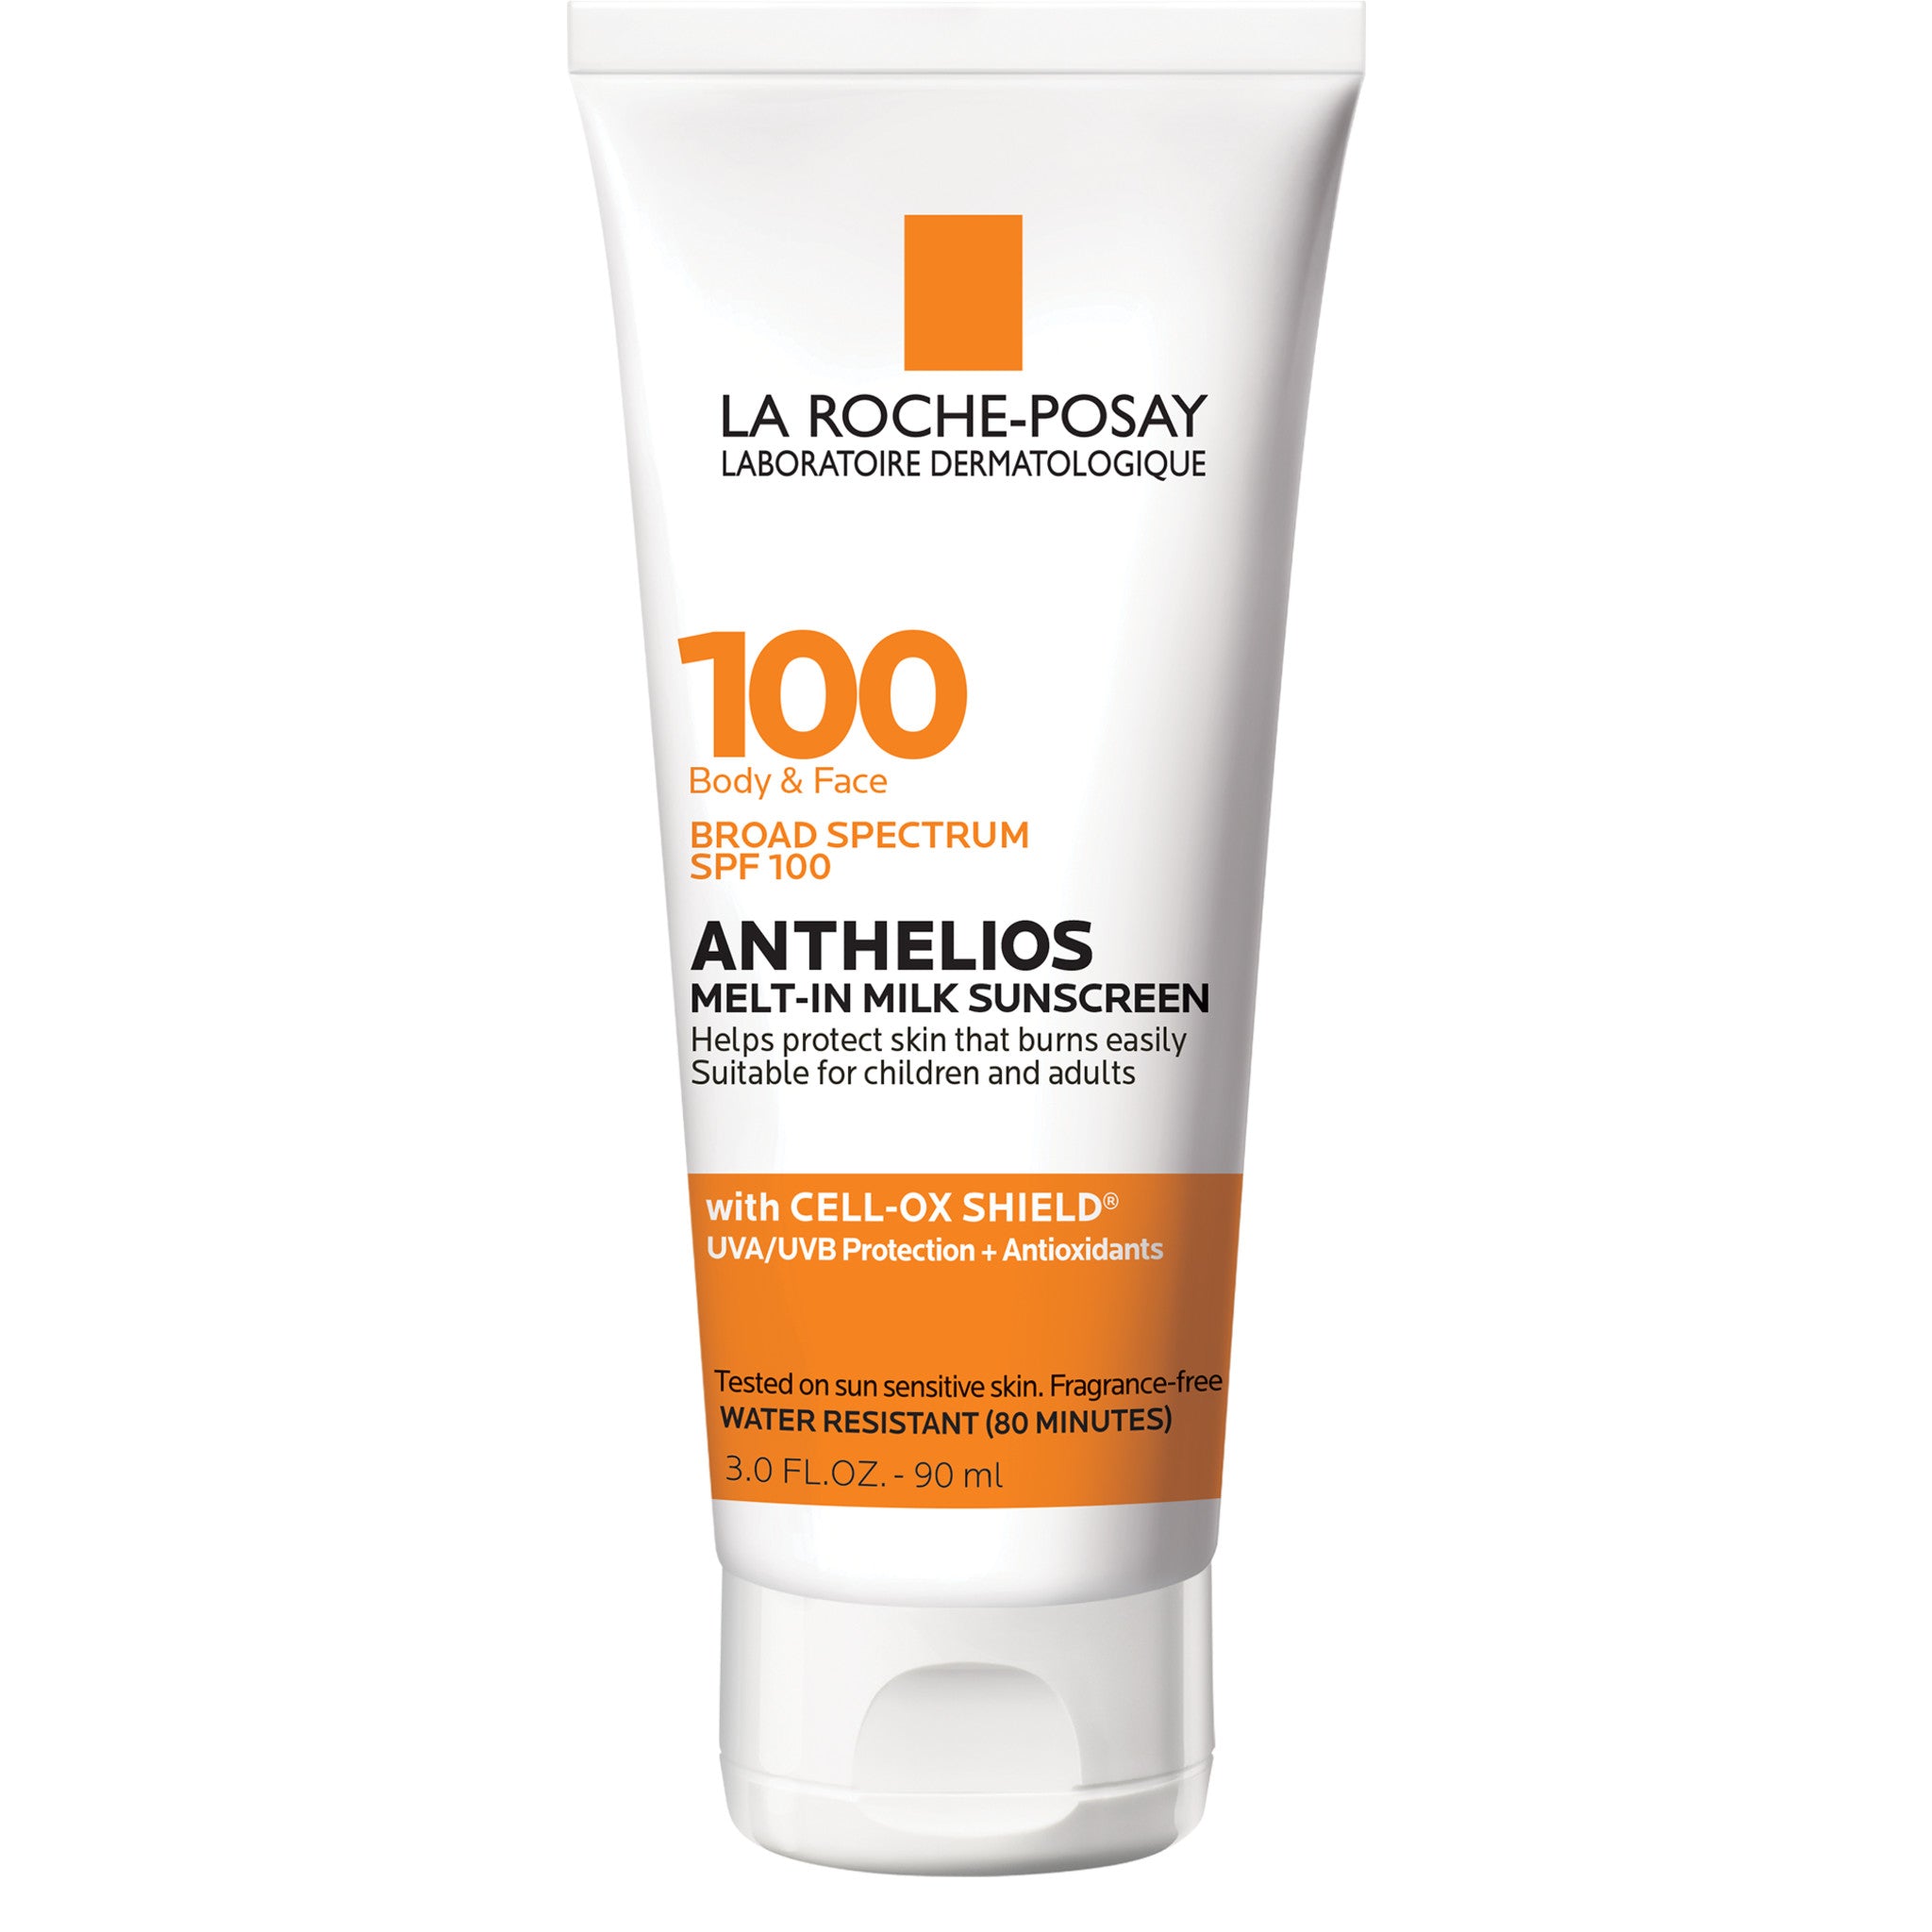 La Roche-Posay Anthelios Melt-in Milk Body and Face Sunscreen